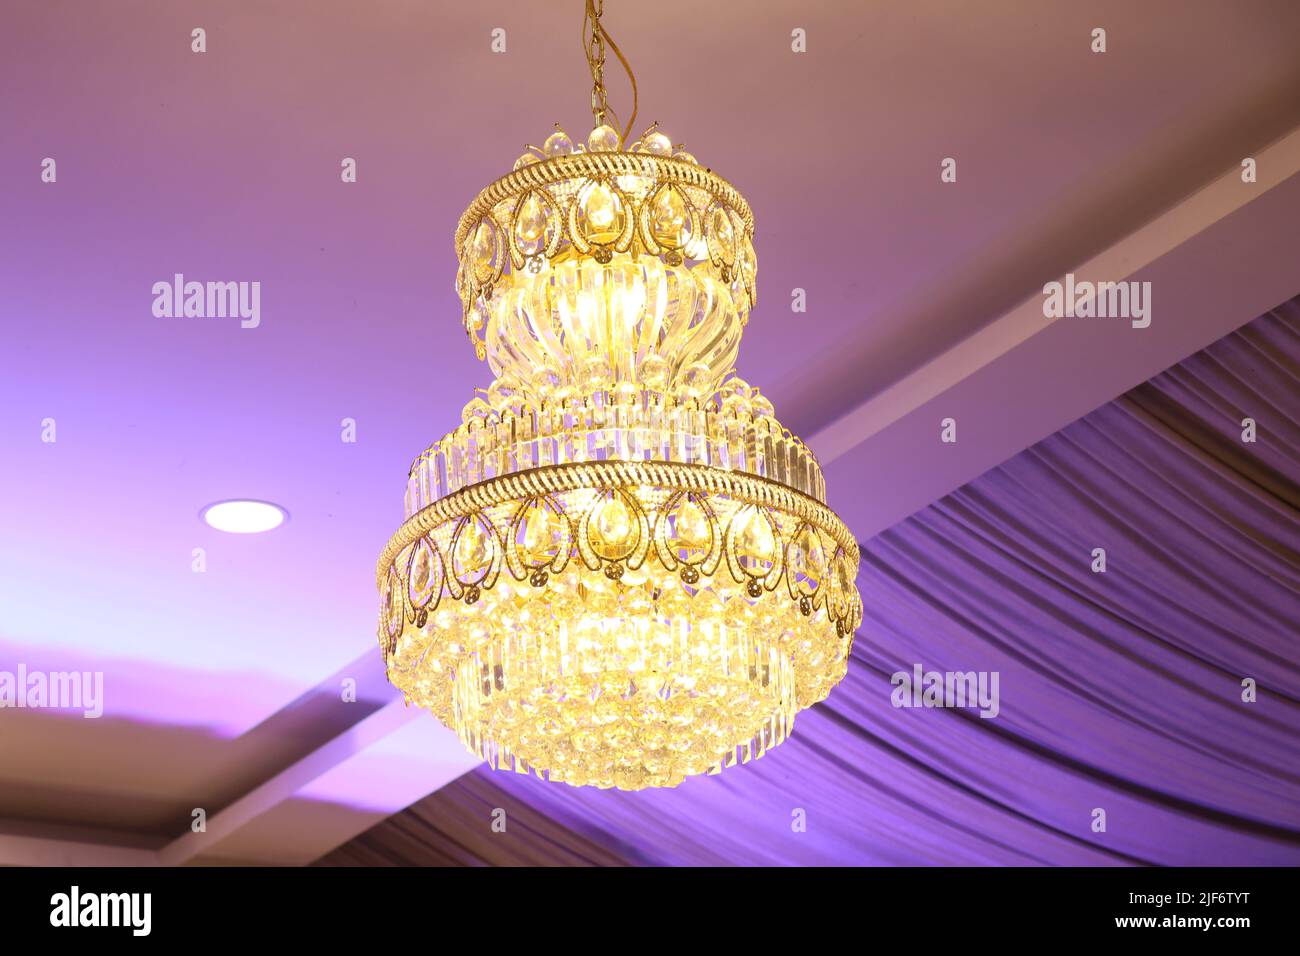 Beautiful crystal chandelier hanging from the ceiling in the interior with lights Stock Photo